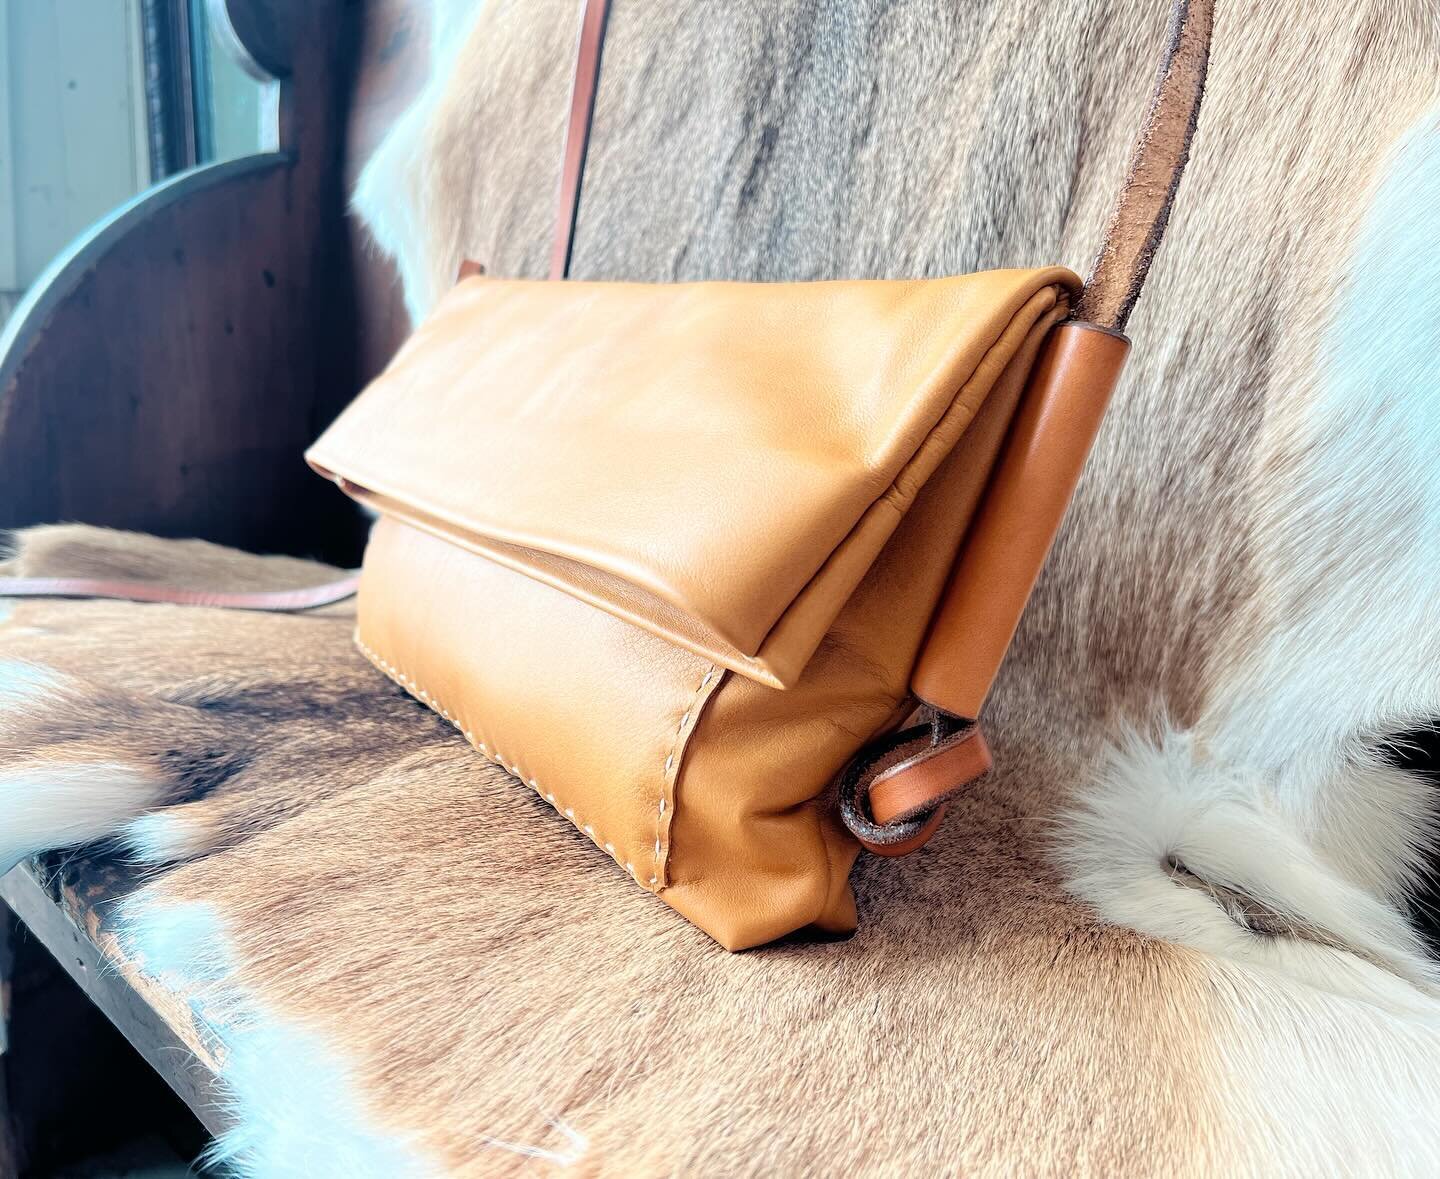 Fold-over. 
Butter.
Soft.
#Mauclereleather #Mauclere #provincetown #foldover #handstitched #handmade #knotstrap #crossbody #leathergoods #leatherbag #leathershop #buttersoftleather #butter #buttersoft